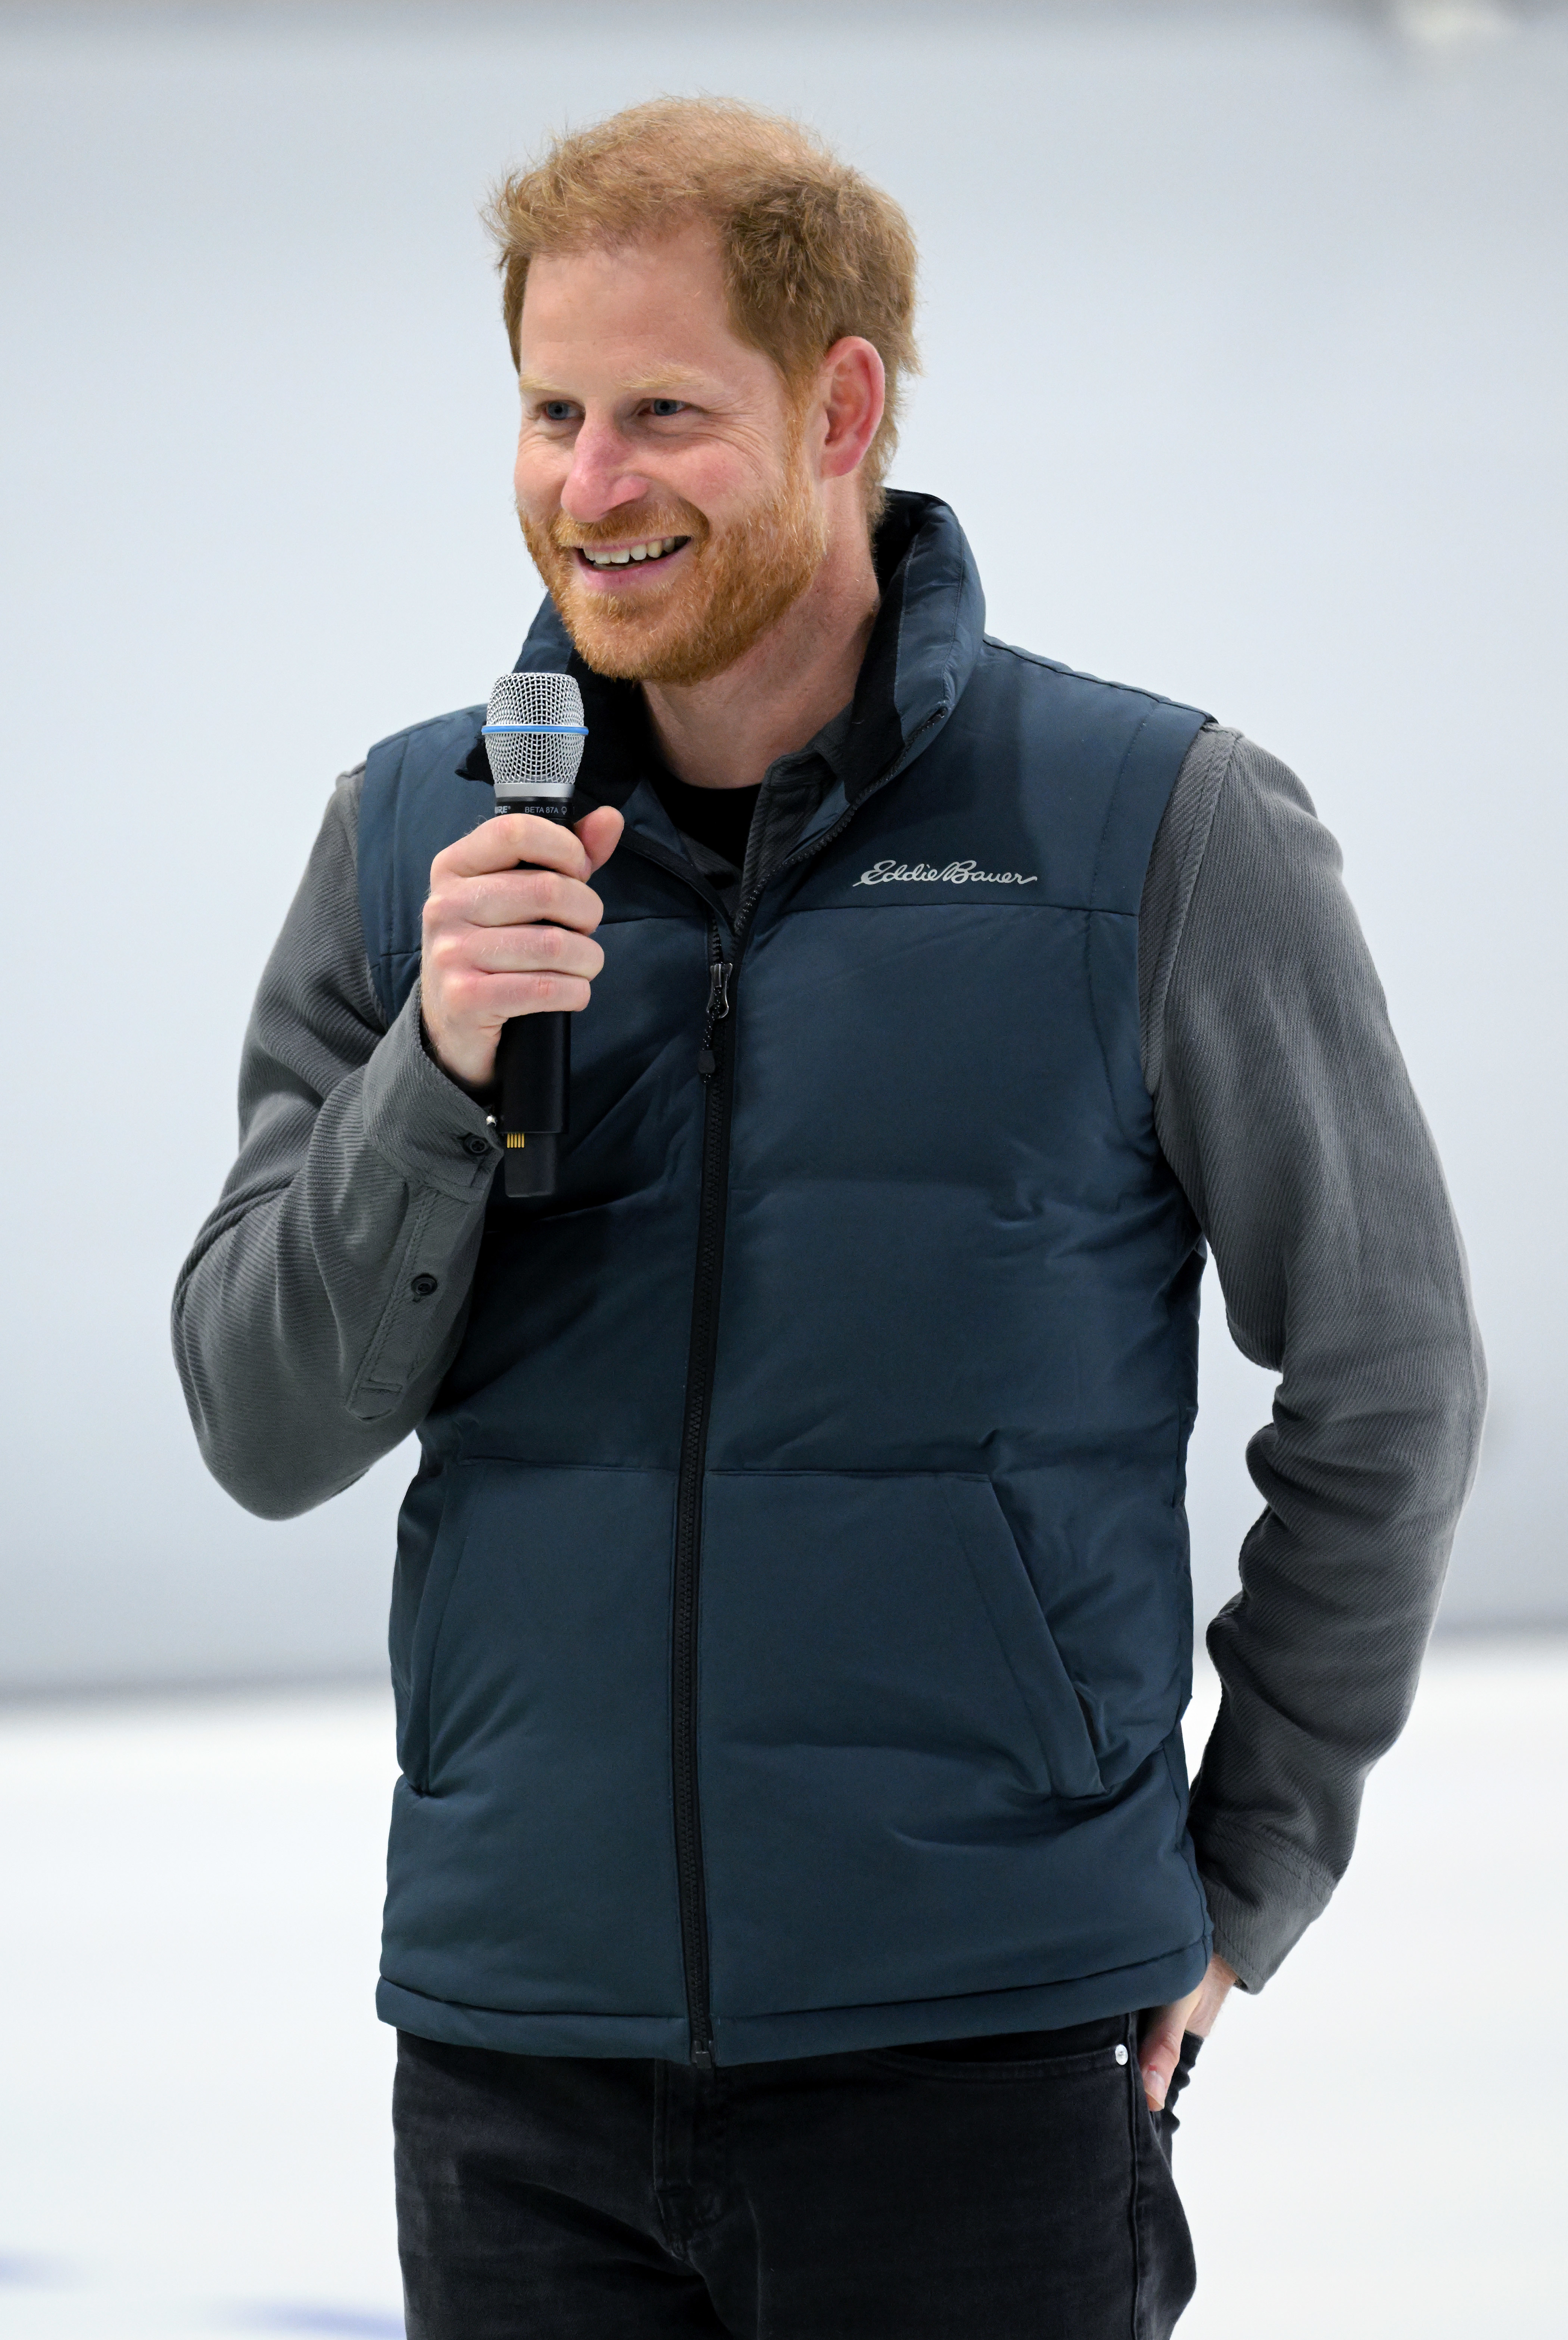 Prince Harry smiles holding a microphone, wearing a casual zip vest and long-sleeve shirt